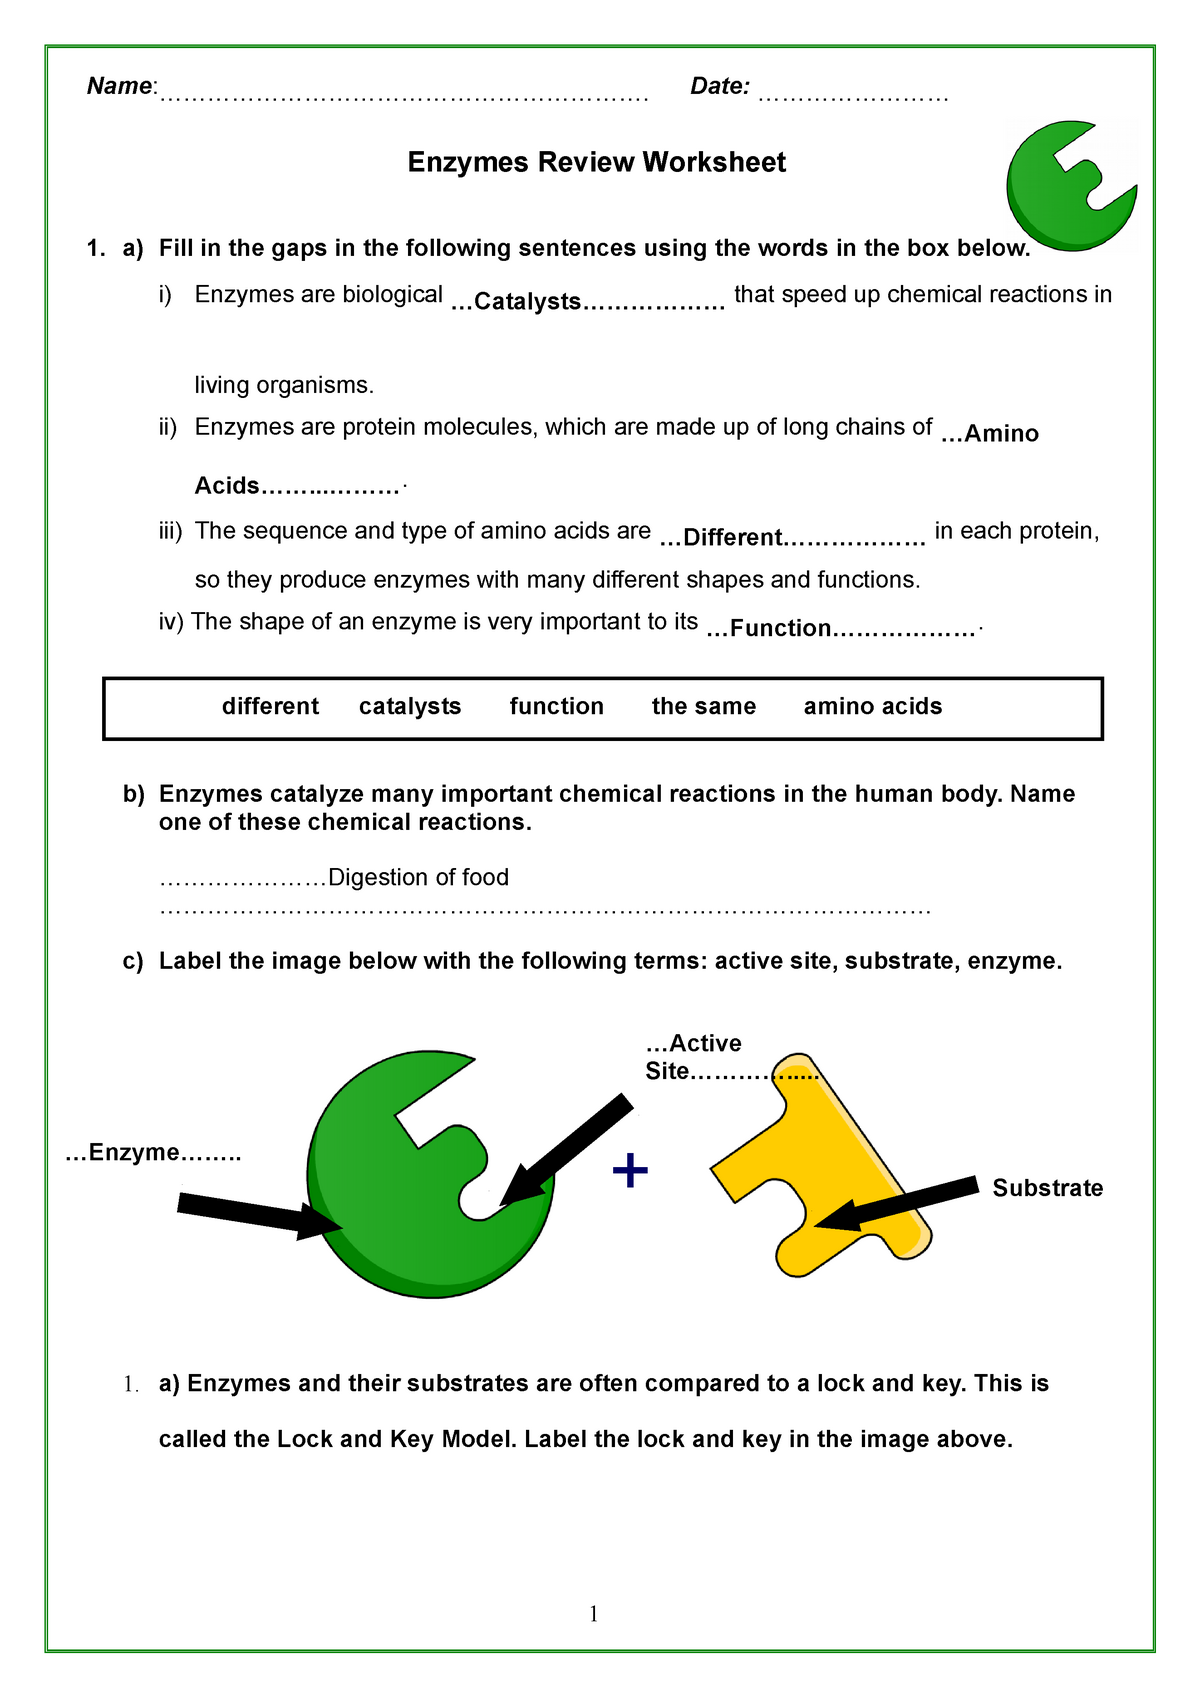 Enzymes review activity key - BLAW20 - Nursing - StuDocu Within Enzyme Review Worksheet Answers